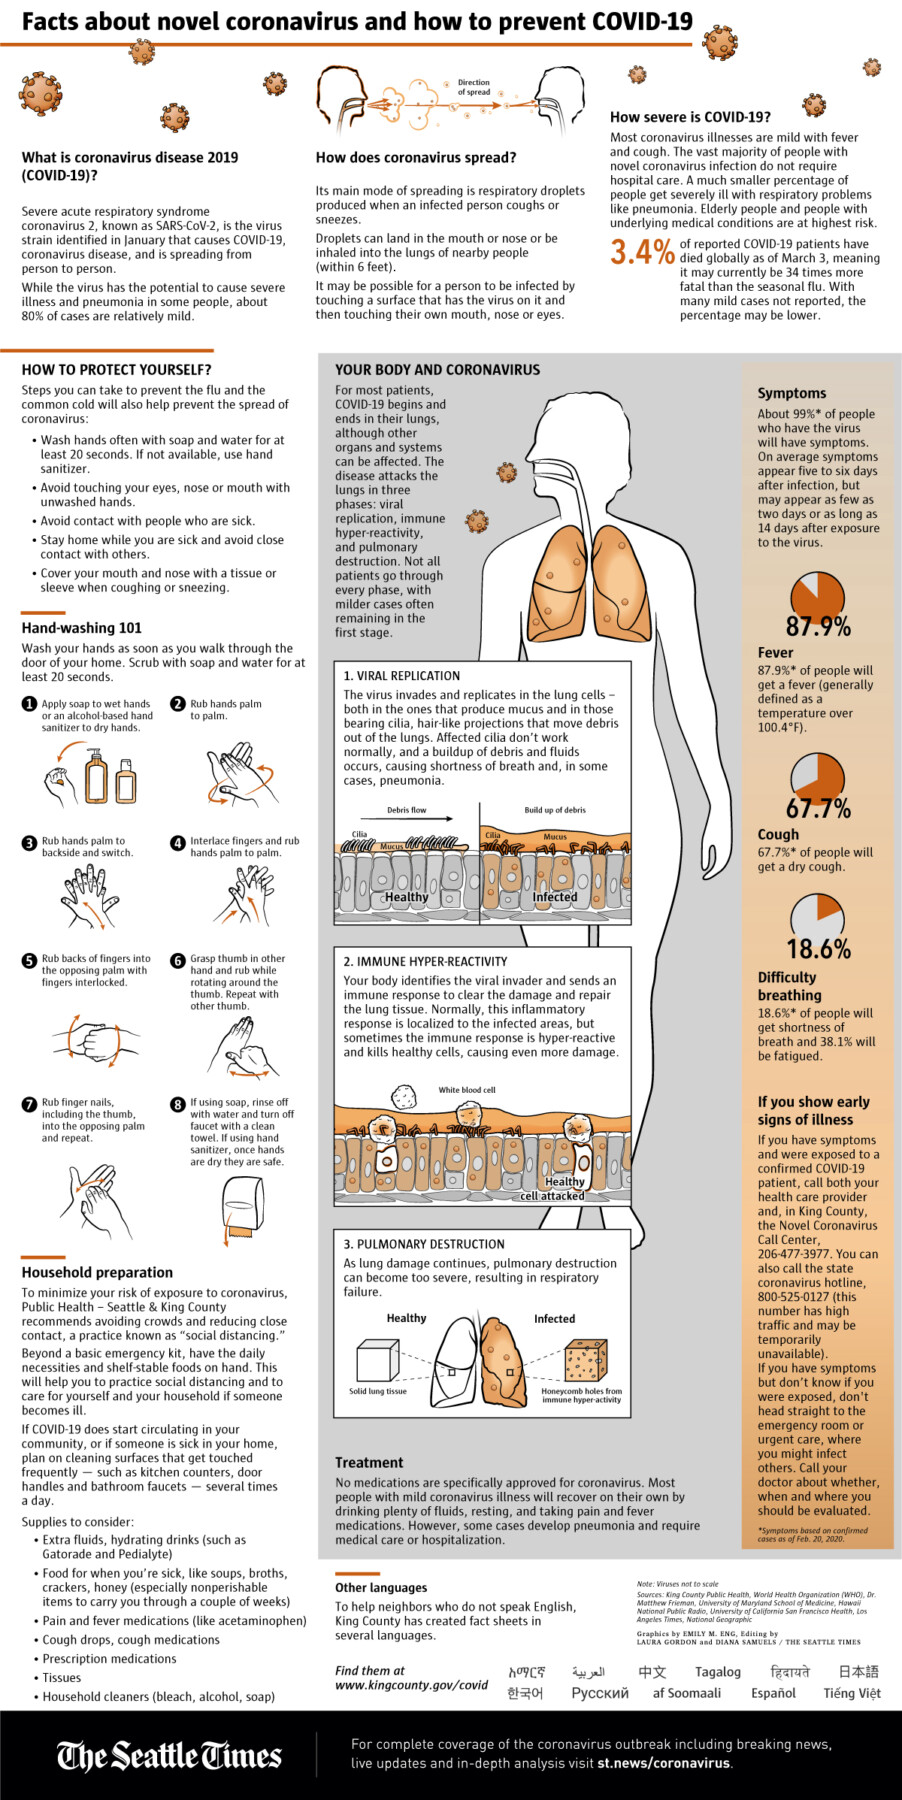 Graphic showing what the coronavirus does inside the human body, how to properly wash hands to disinfect them and how it jumps from person to person through saliva particles.